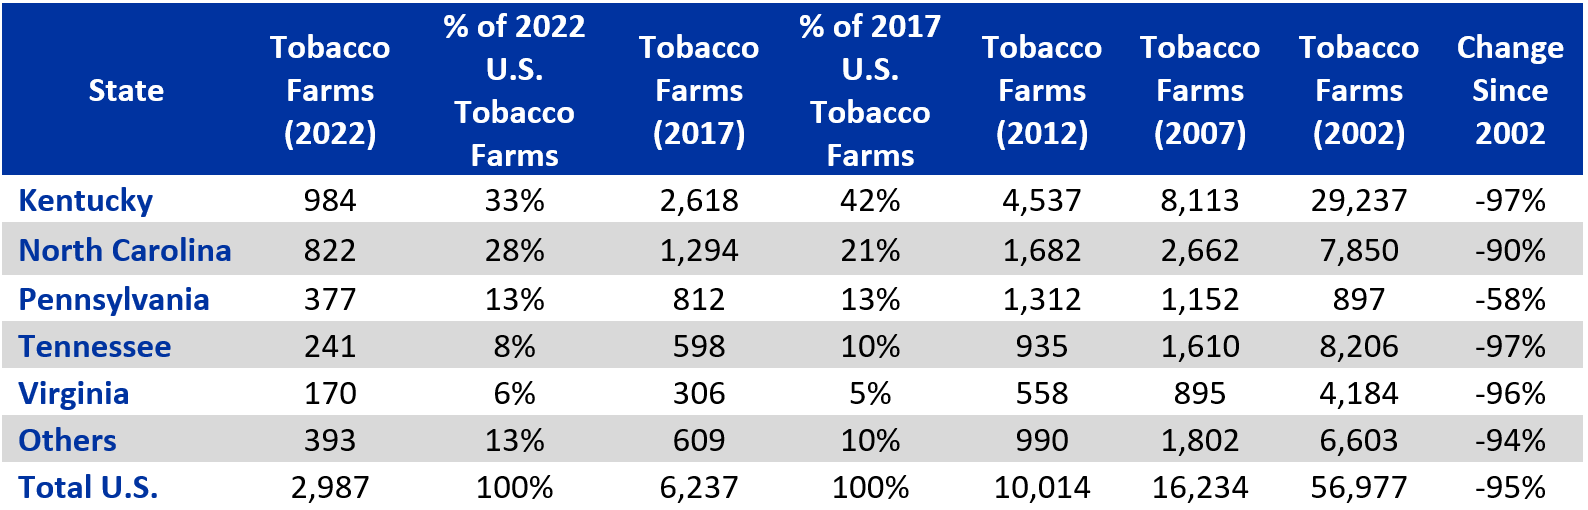 Table 1: Number of Tobacco Farms by State